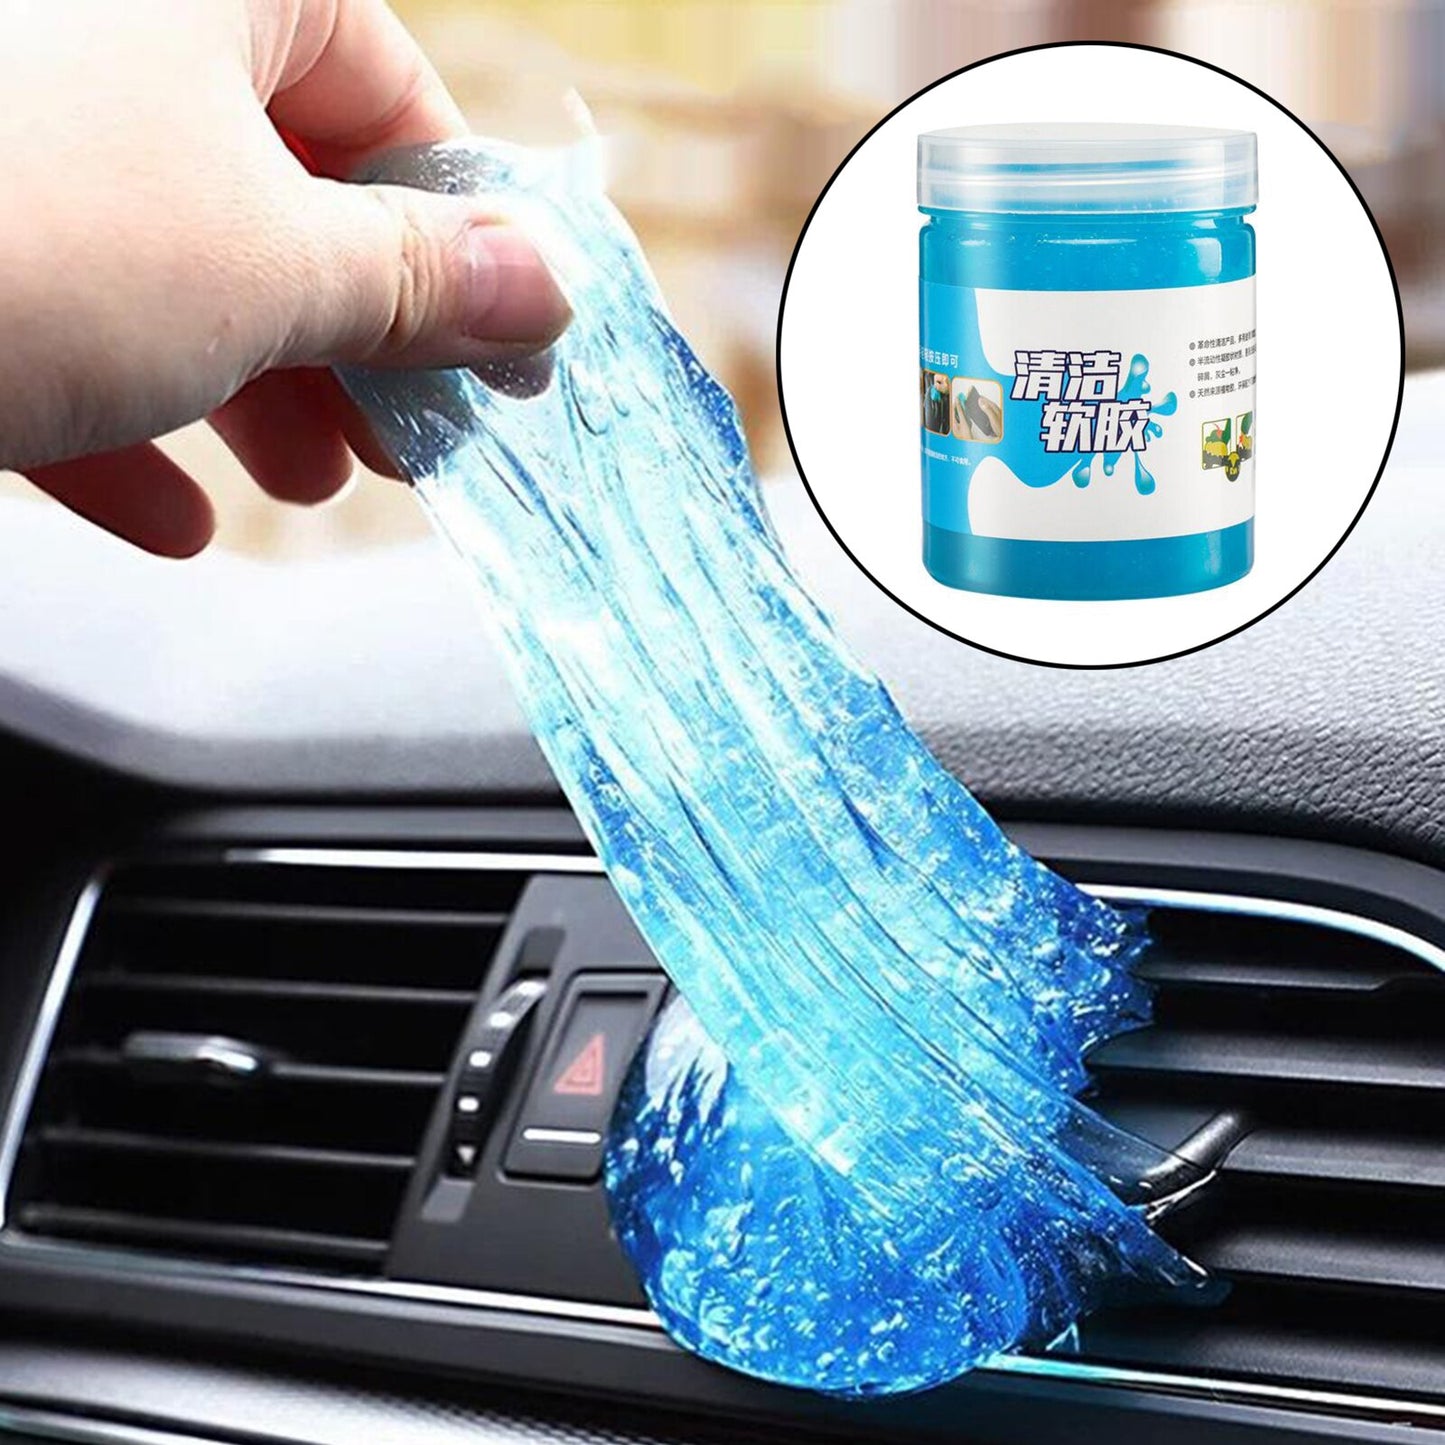 Professional title: "160g Auto Car Cleaning Pad Glue Air Outlet Powder Cleaner - Dust Remover Gel for Home, Car, and Computer Keyboard"